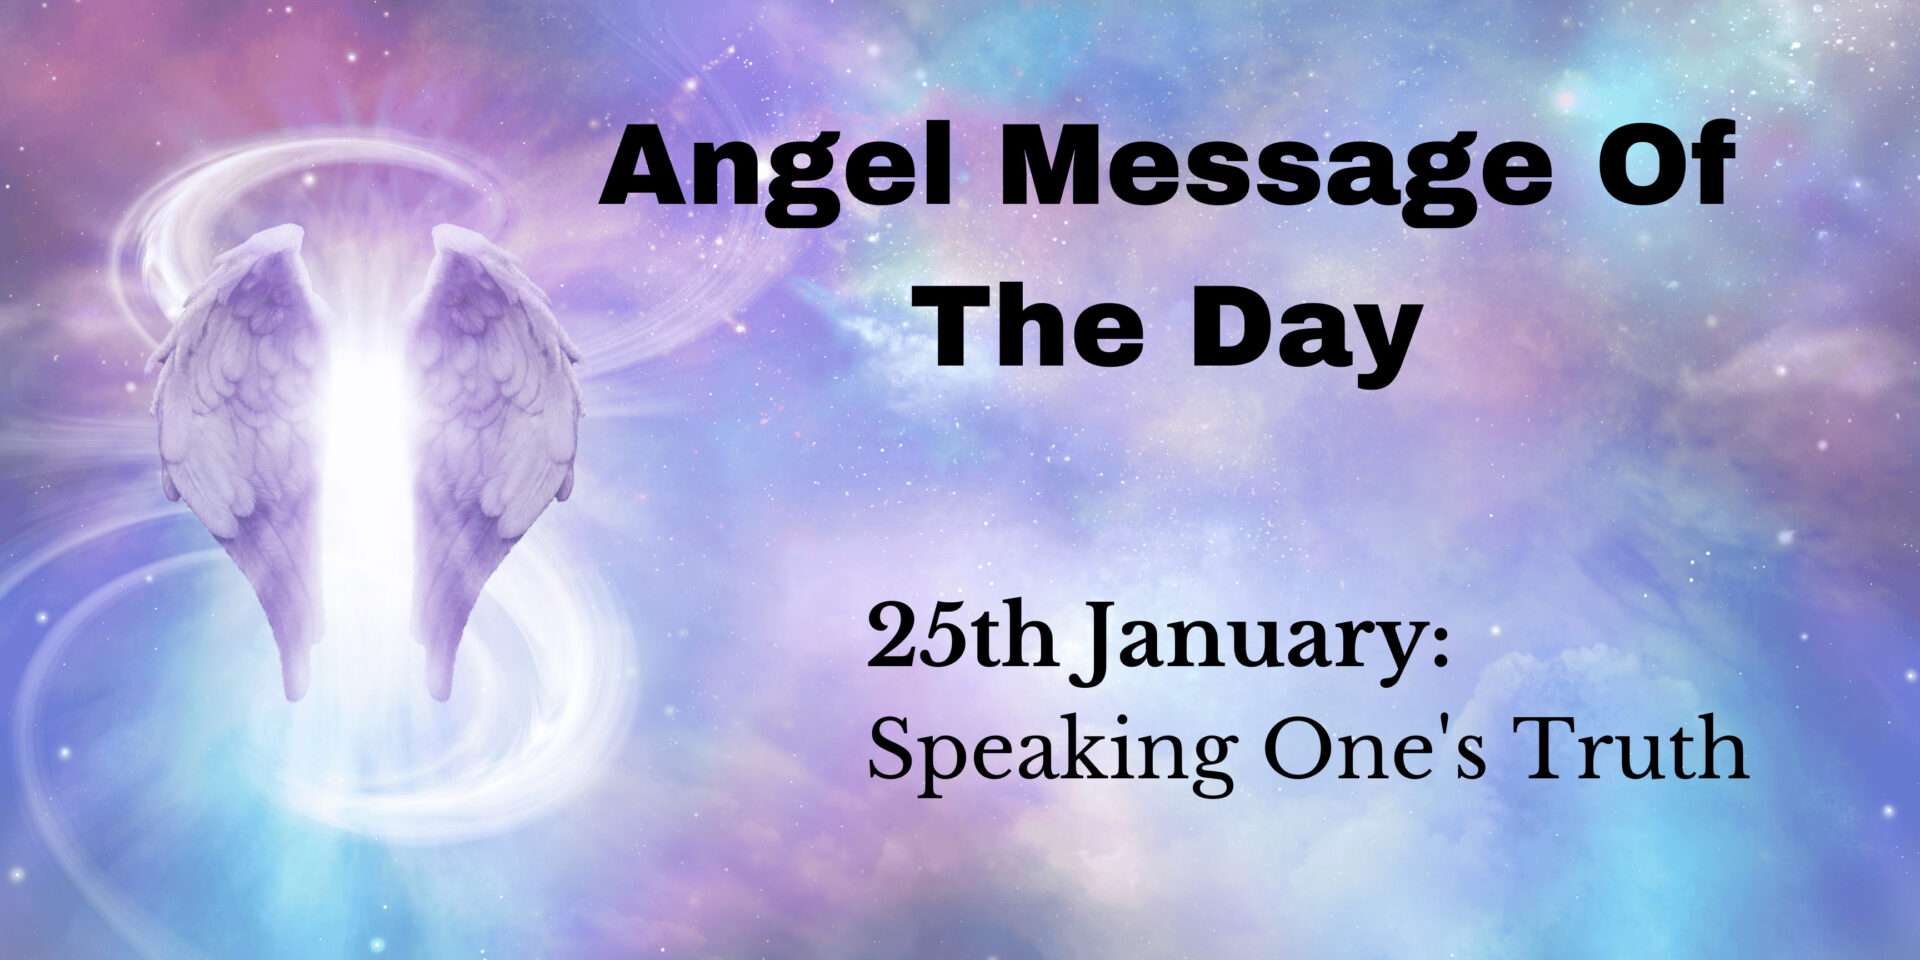 angel message of the day : speaking one's truth